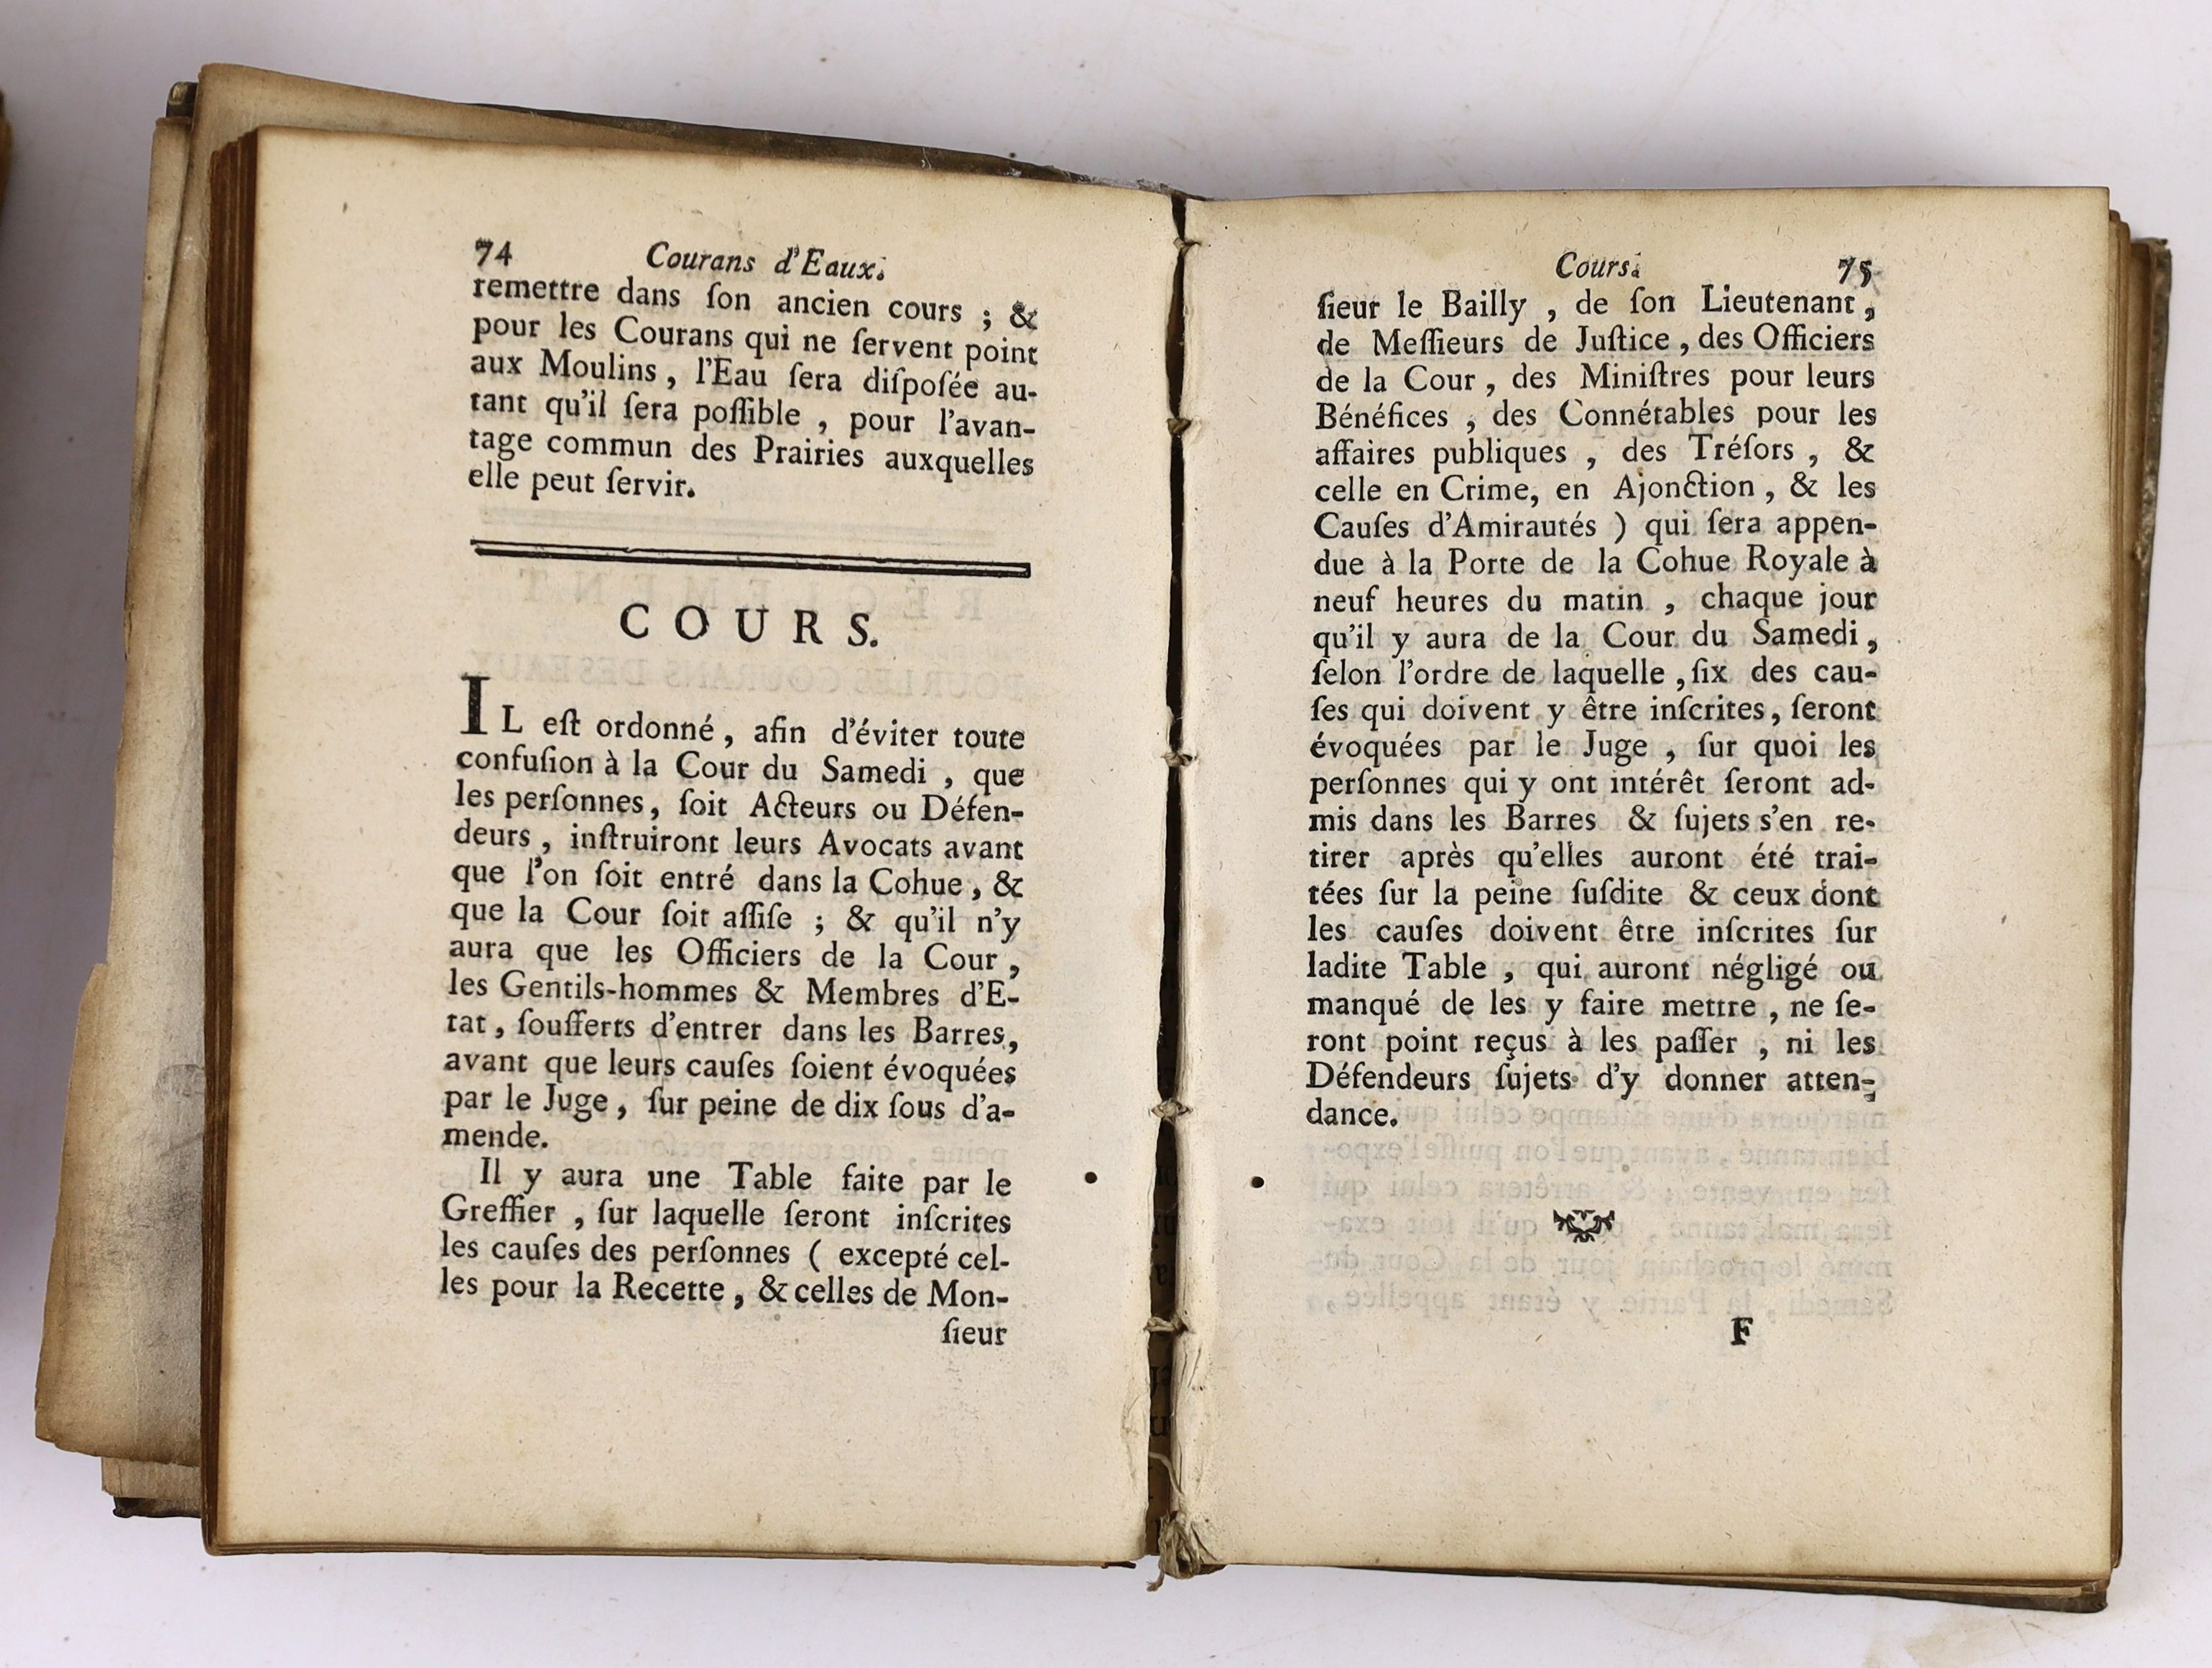 Various - A Code of Laws for the Island of Jersey - 2 copies, in English and French, one lacking title and annotated through in ink in a contemporary hand, vellum, HMG, London, 1771 (2)